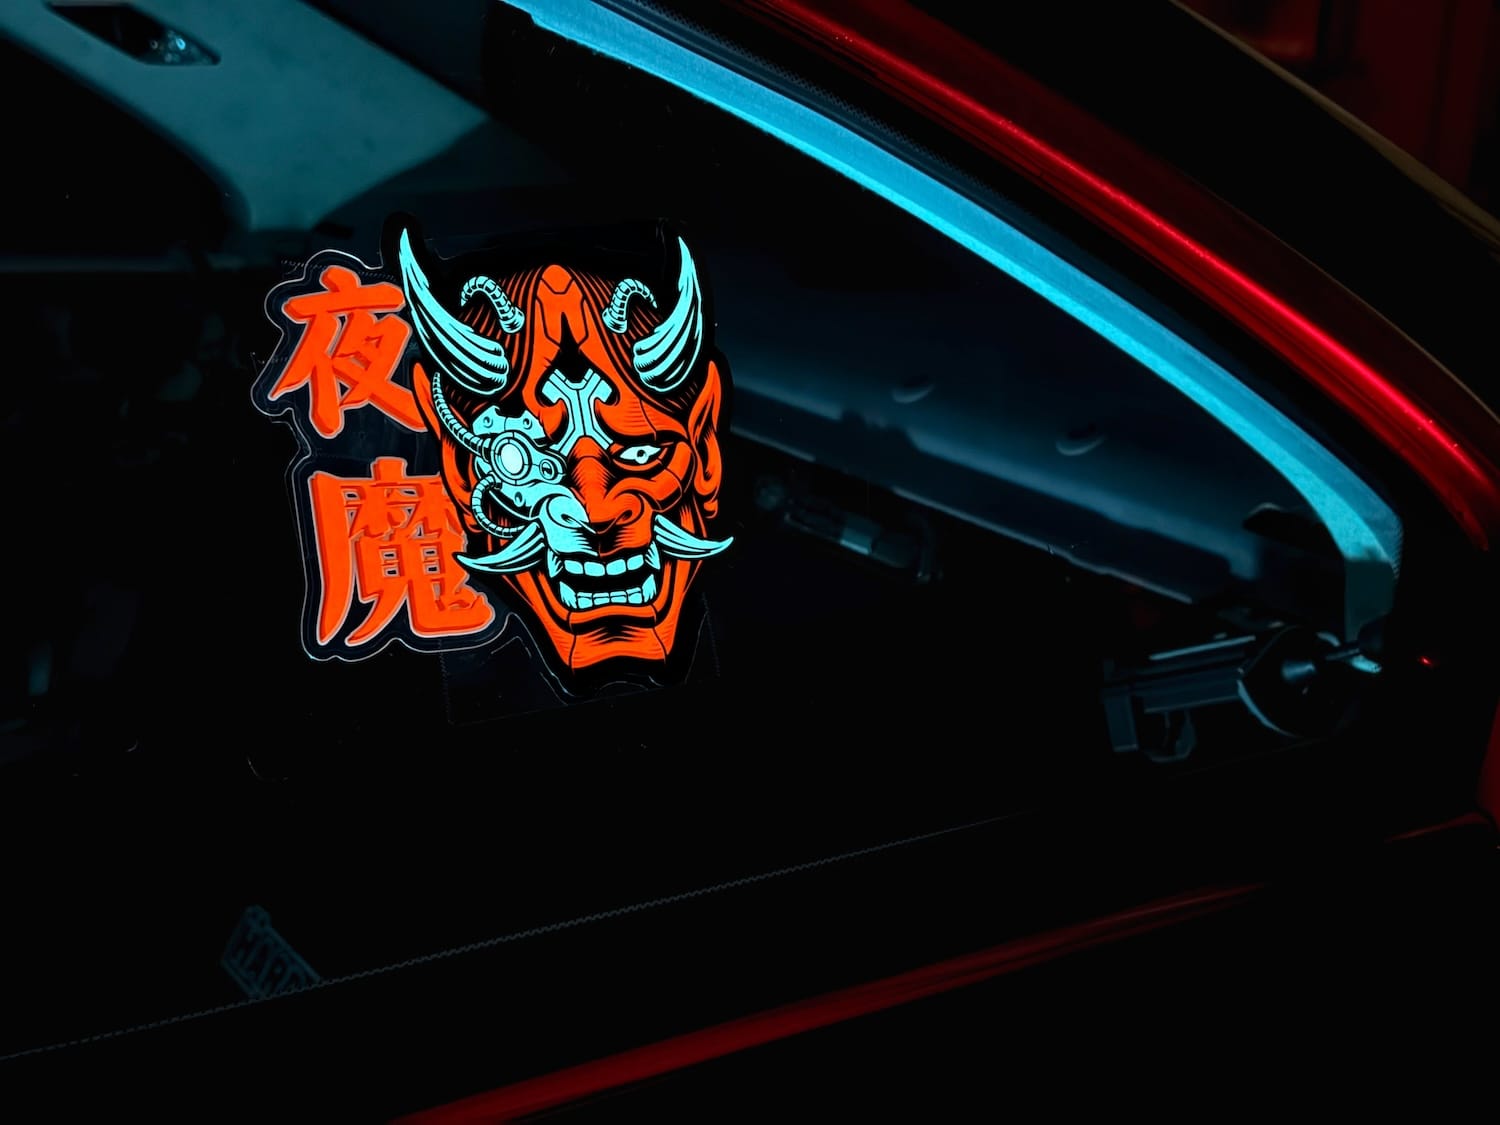 Night Demon - v3.0 Remote Control USB Rechargeable - Illuminated Adhesive Decal